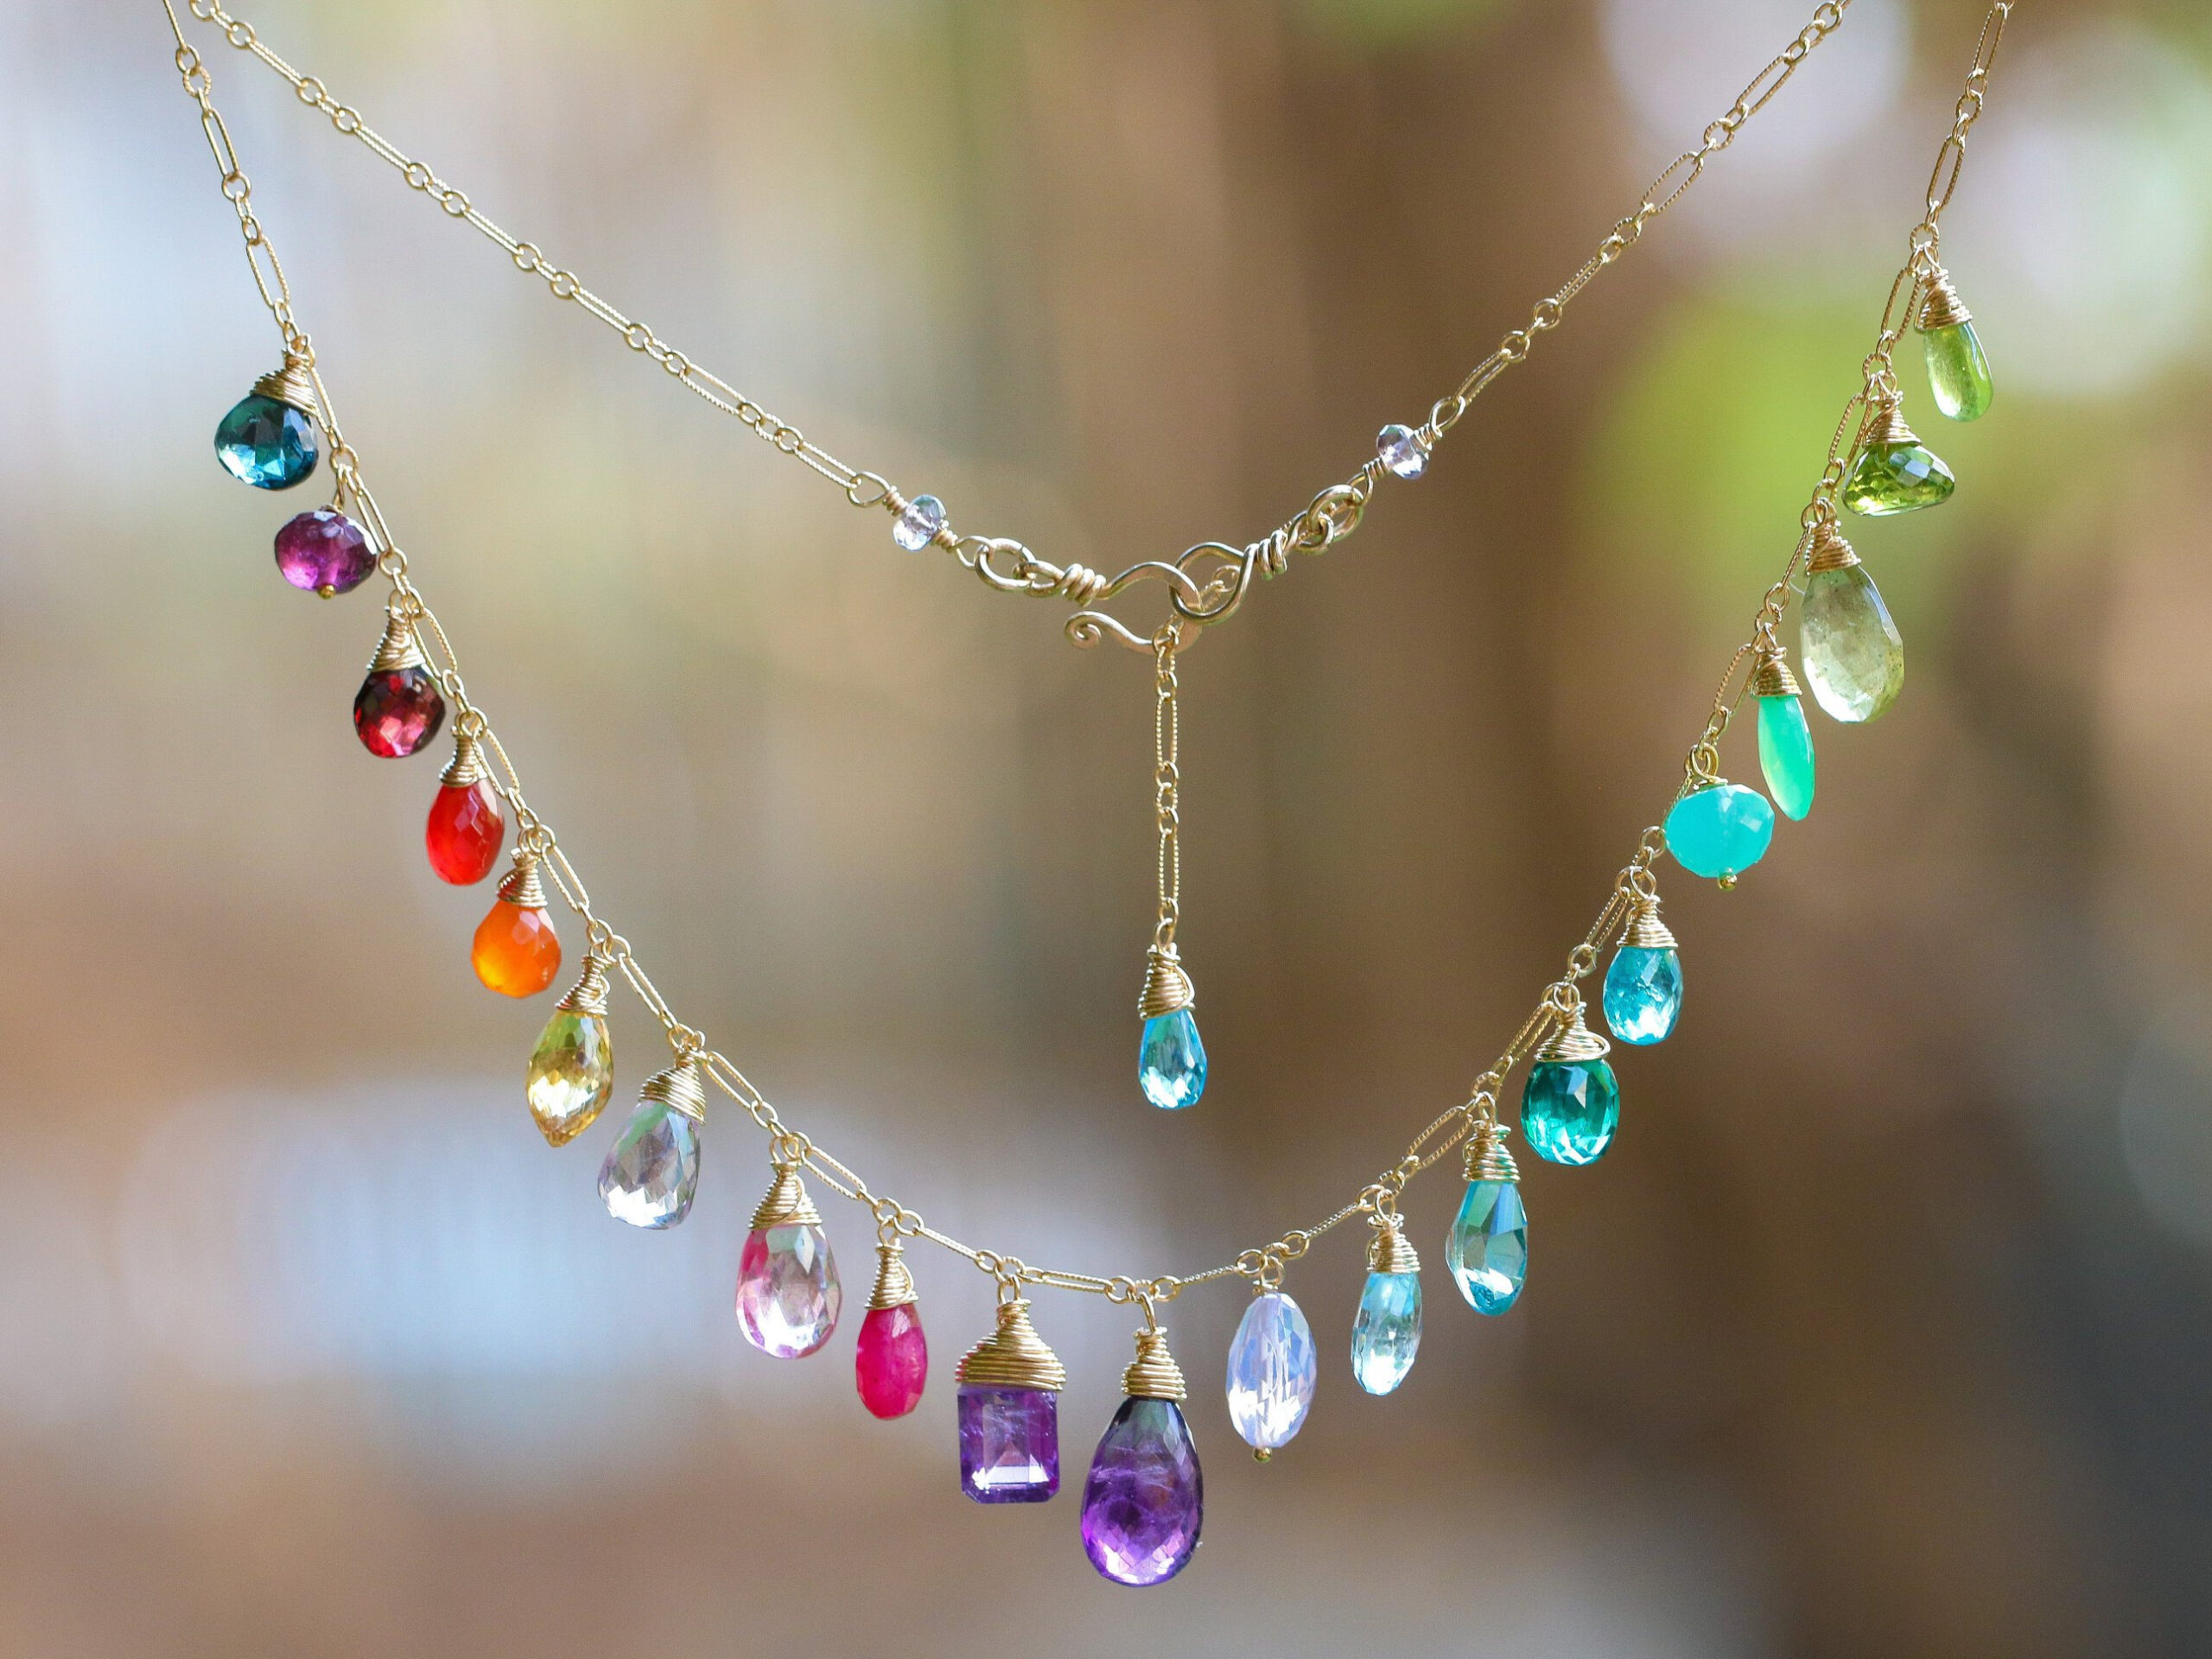 The Fancy Day Necklace - Rainbow Multi Gemstone Necklace in Gold Filled, Precious Drop Necklace